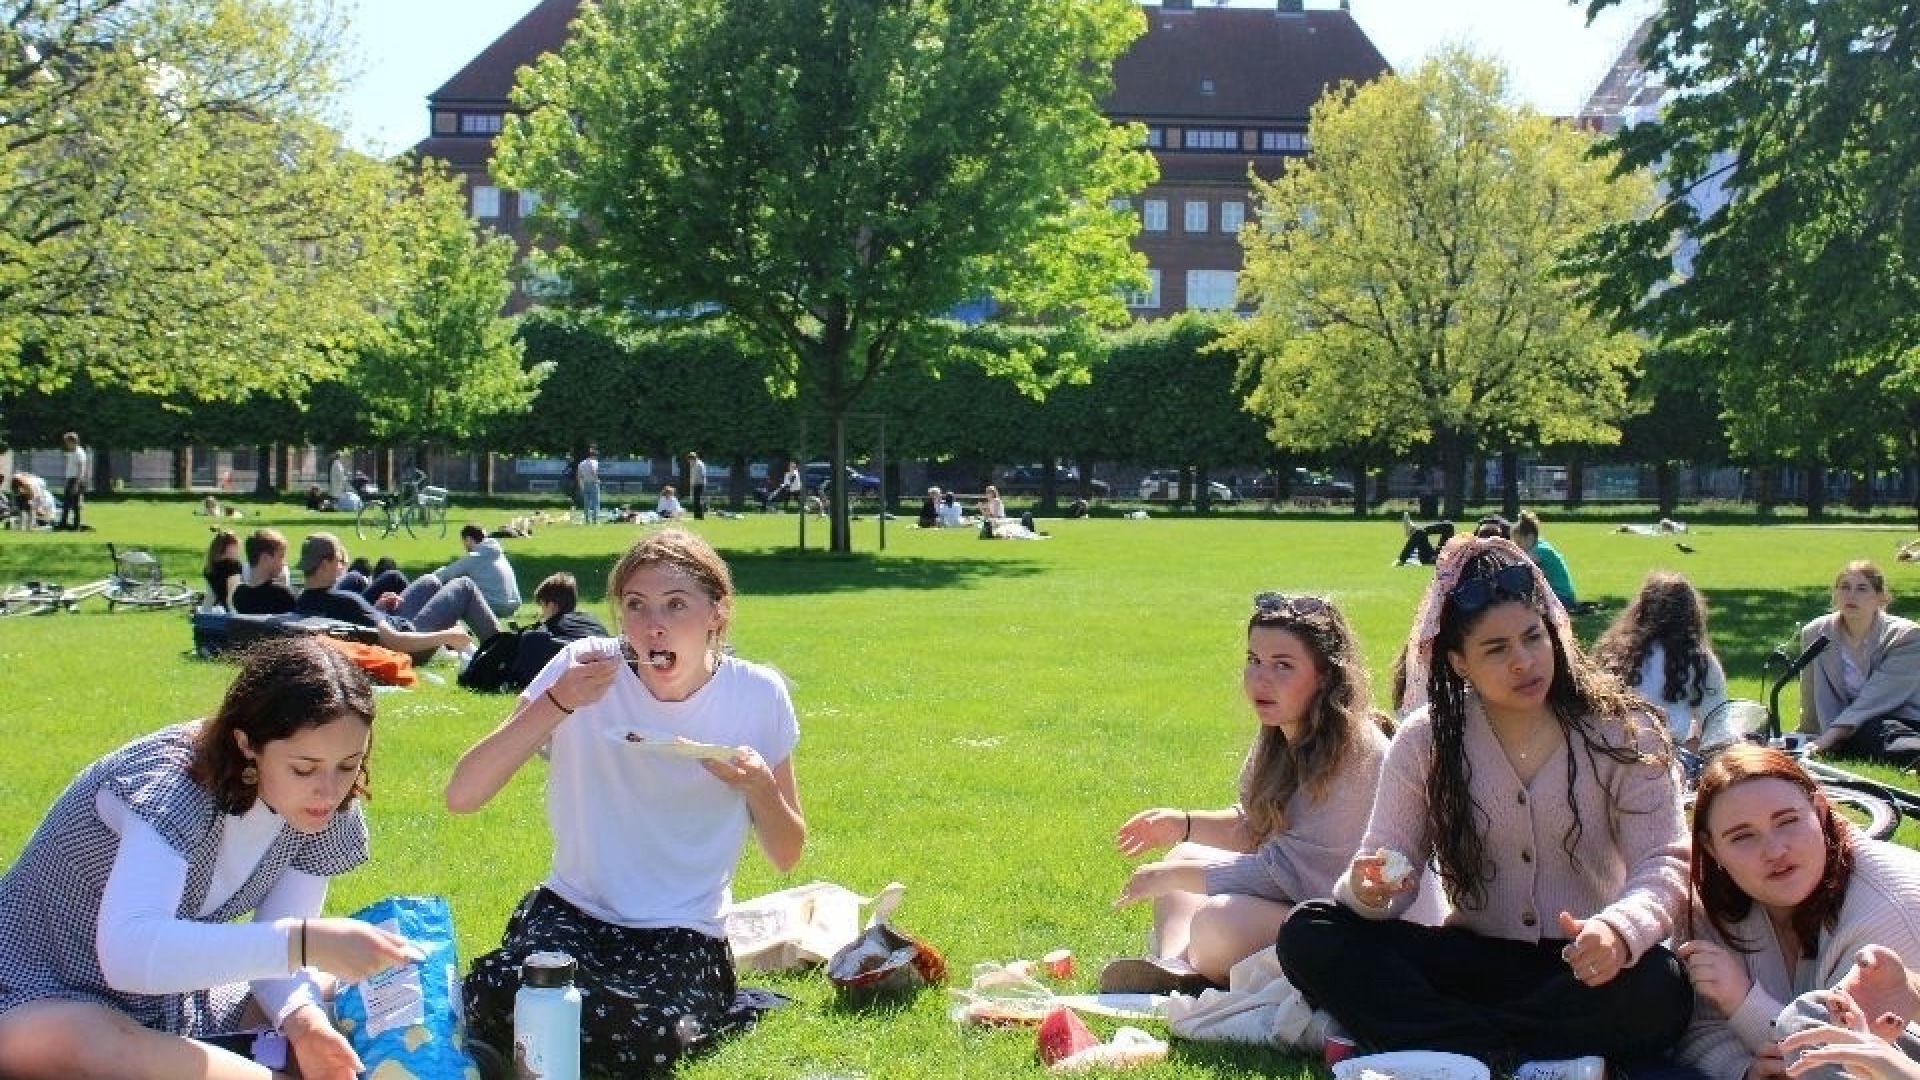 group of people sitting in a circle on the grass enjoying a picnic lunch